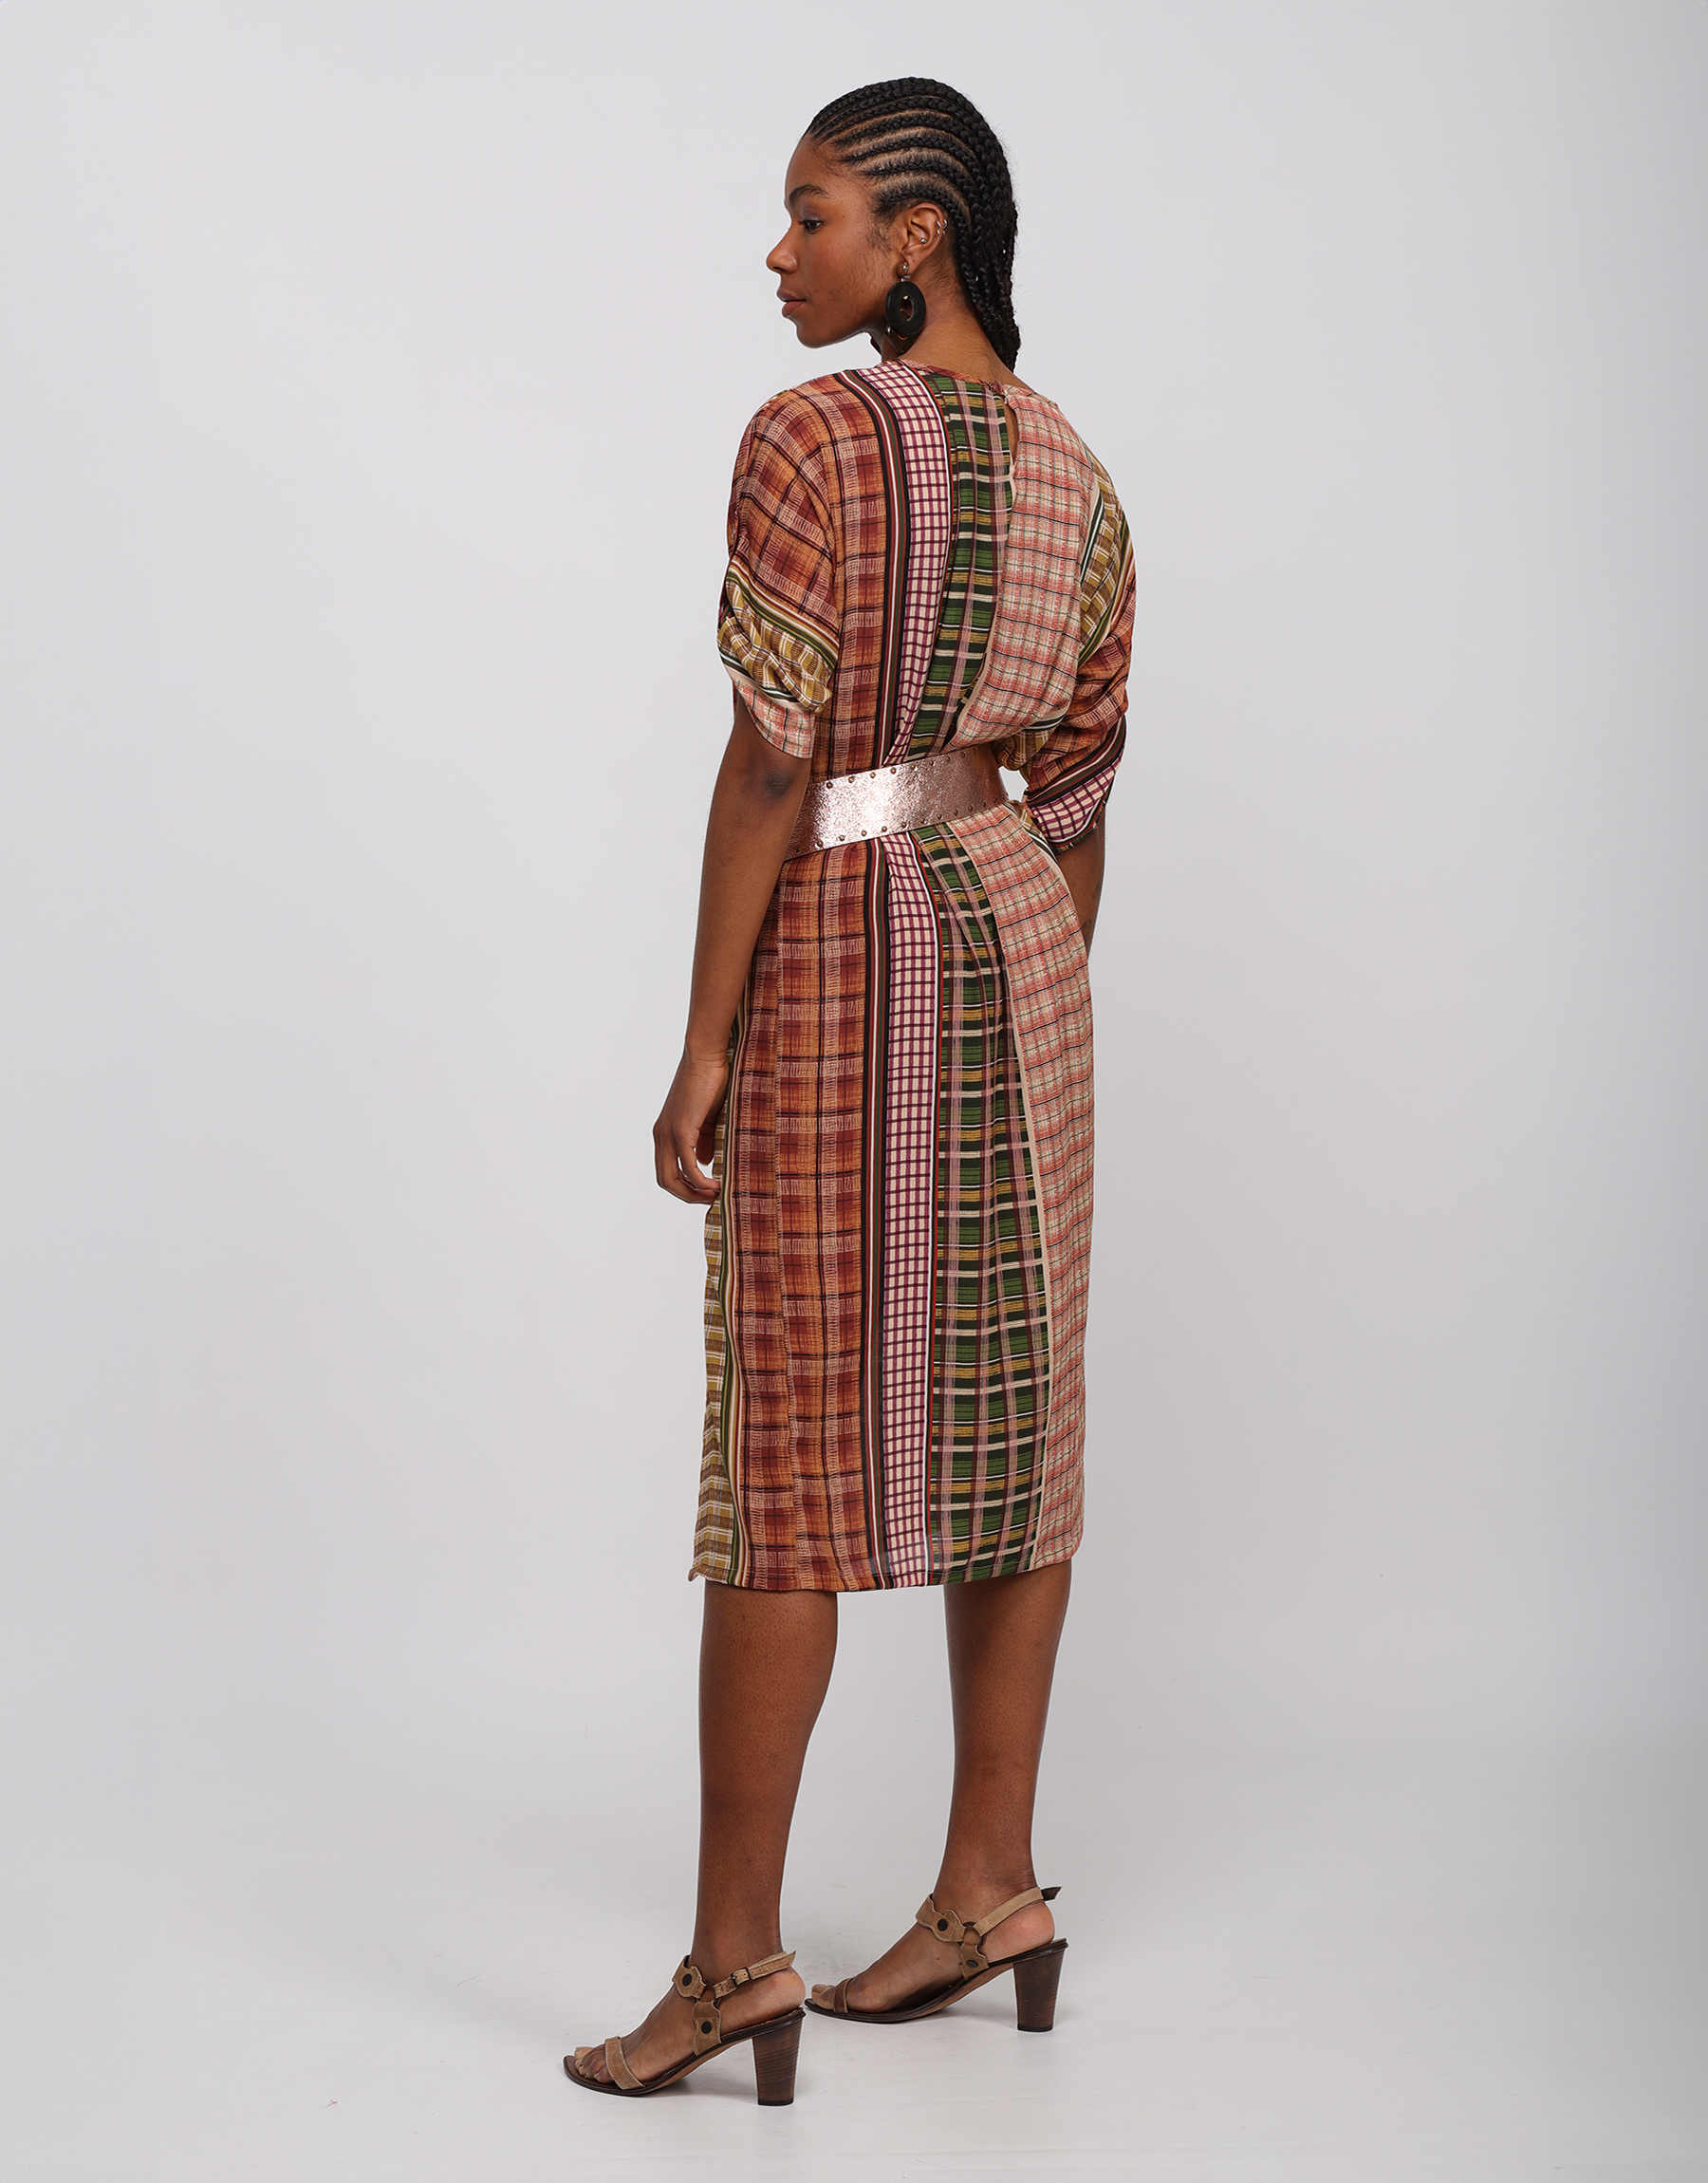 Flowing straight dress in patchwork madras printed viscose in spice tonesFlowing straight dress in patchwork madras printed viscose in spice tones